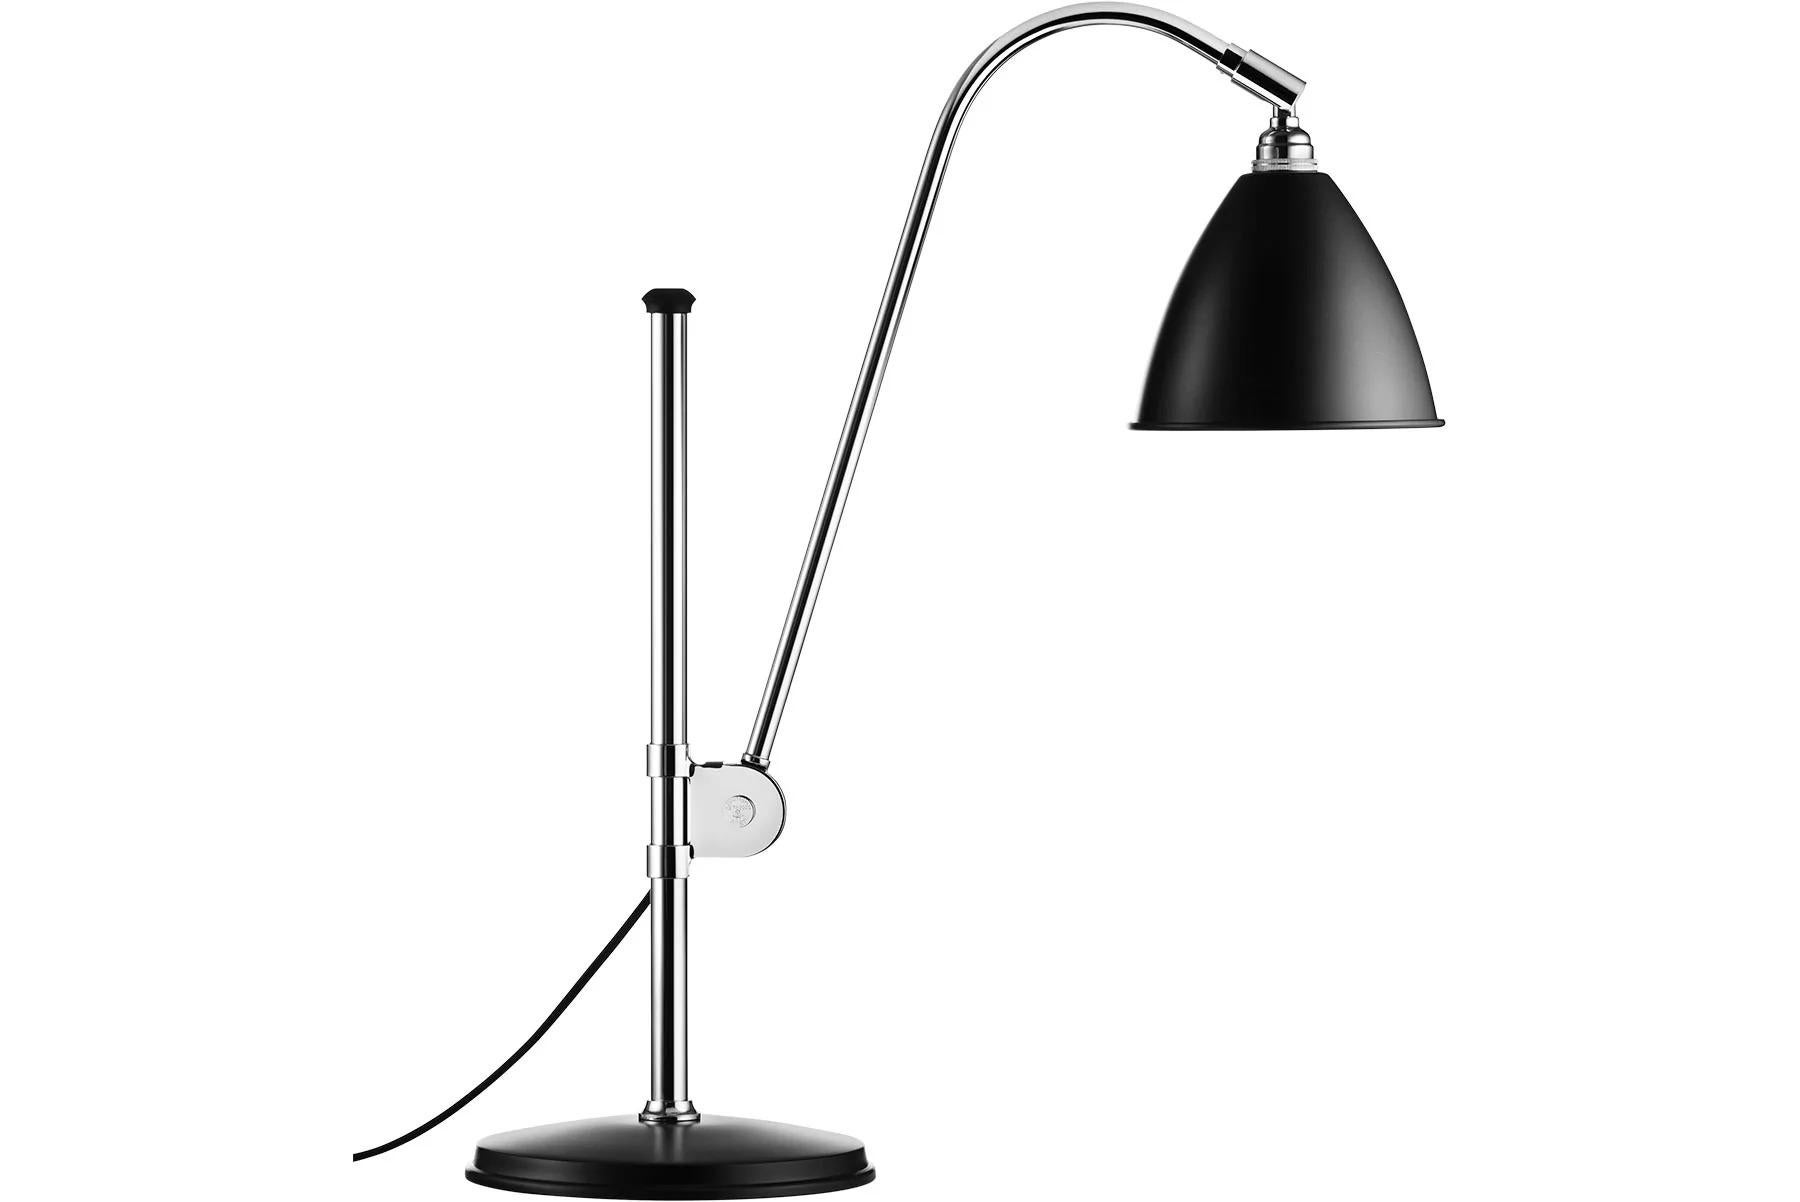 Designed by Robert Dudley Best in 1930, the Bestlite BL1 Table Lamp is a coveted design worldwide with strong references to Bauhaus. Winston Churchill, former Prime Minister of Great Britain, personally chose the Bestlite BL1 Table Lamp for his desk